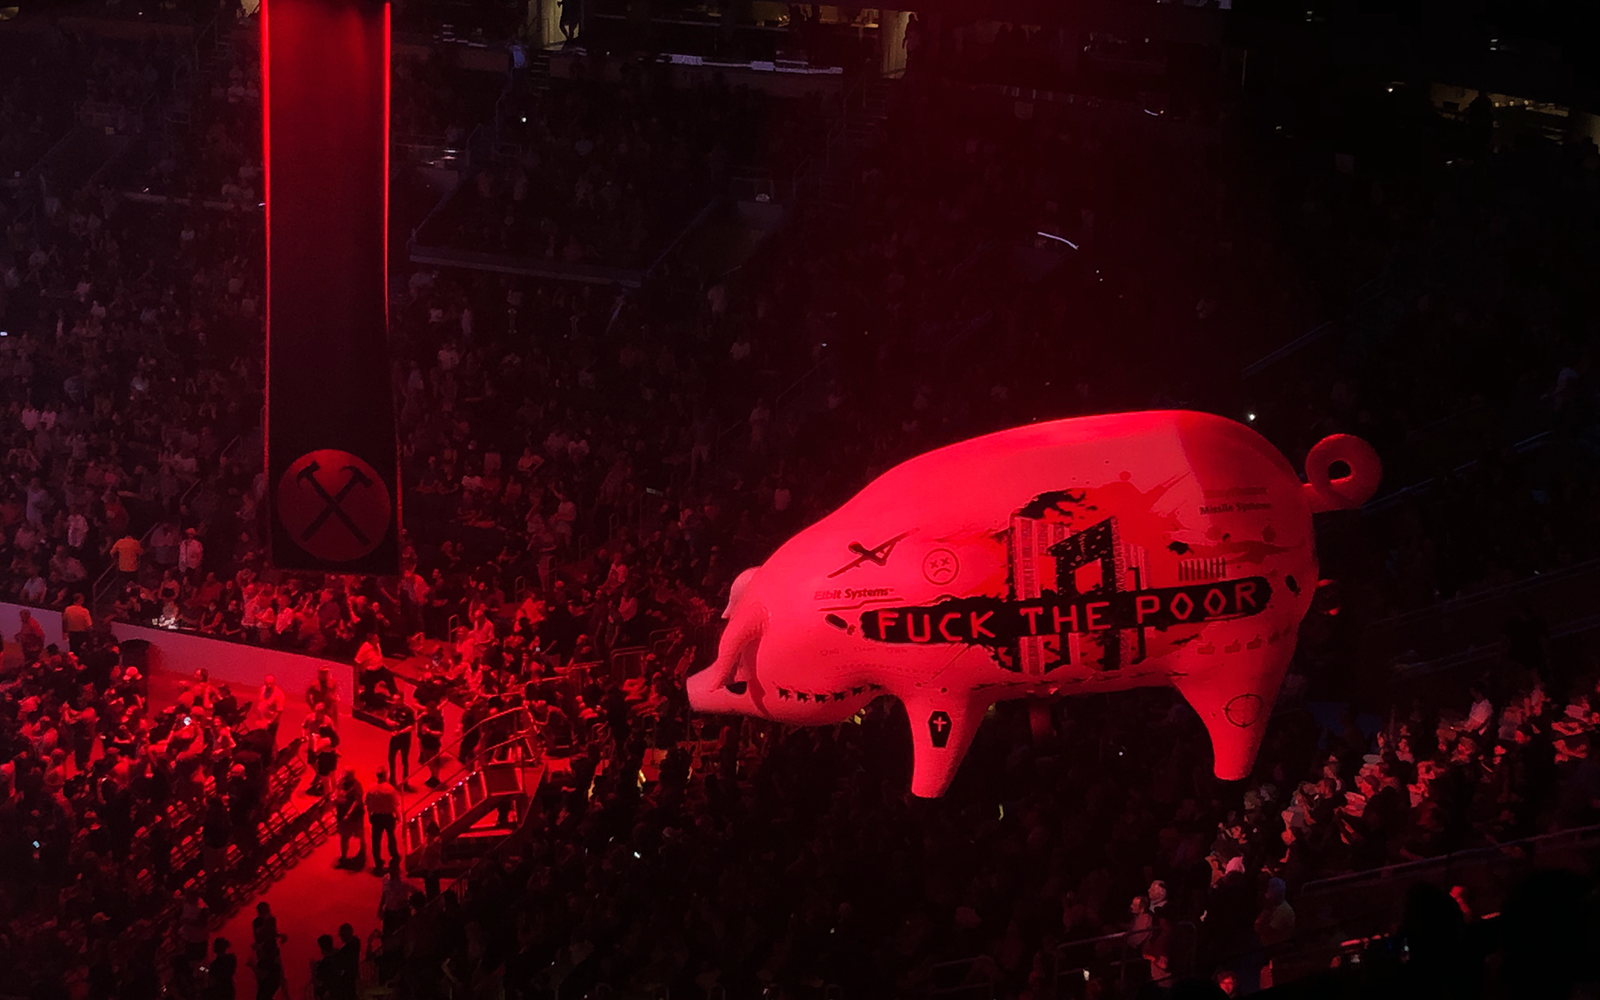 Roger Waters' flying pig